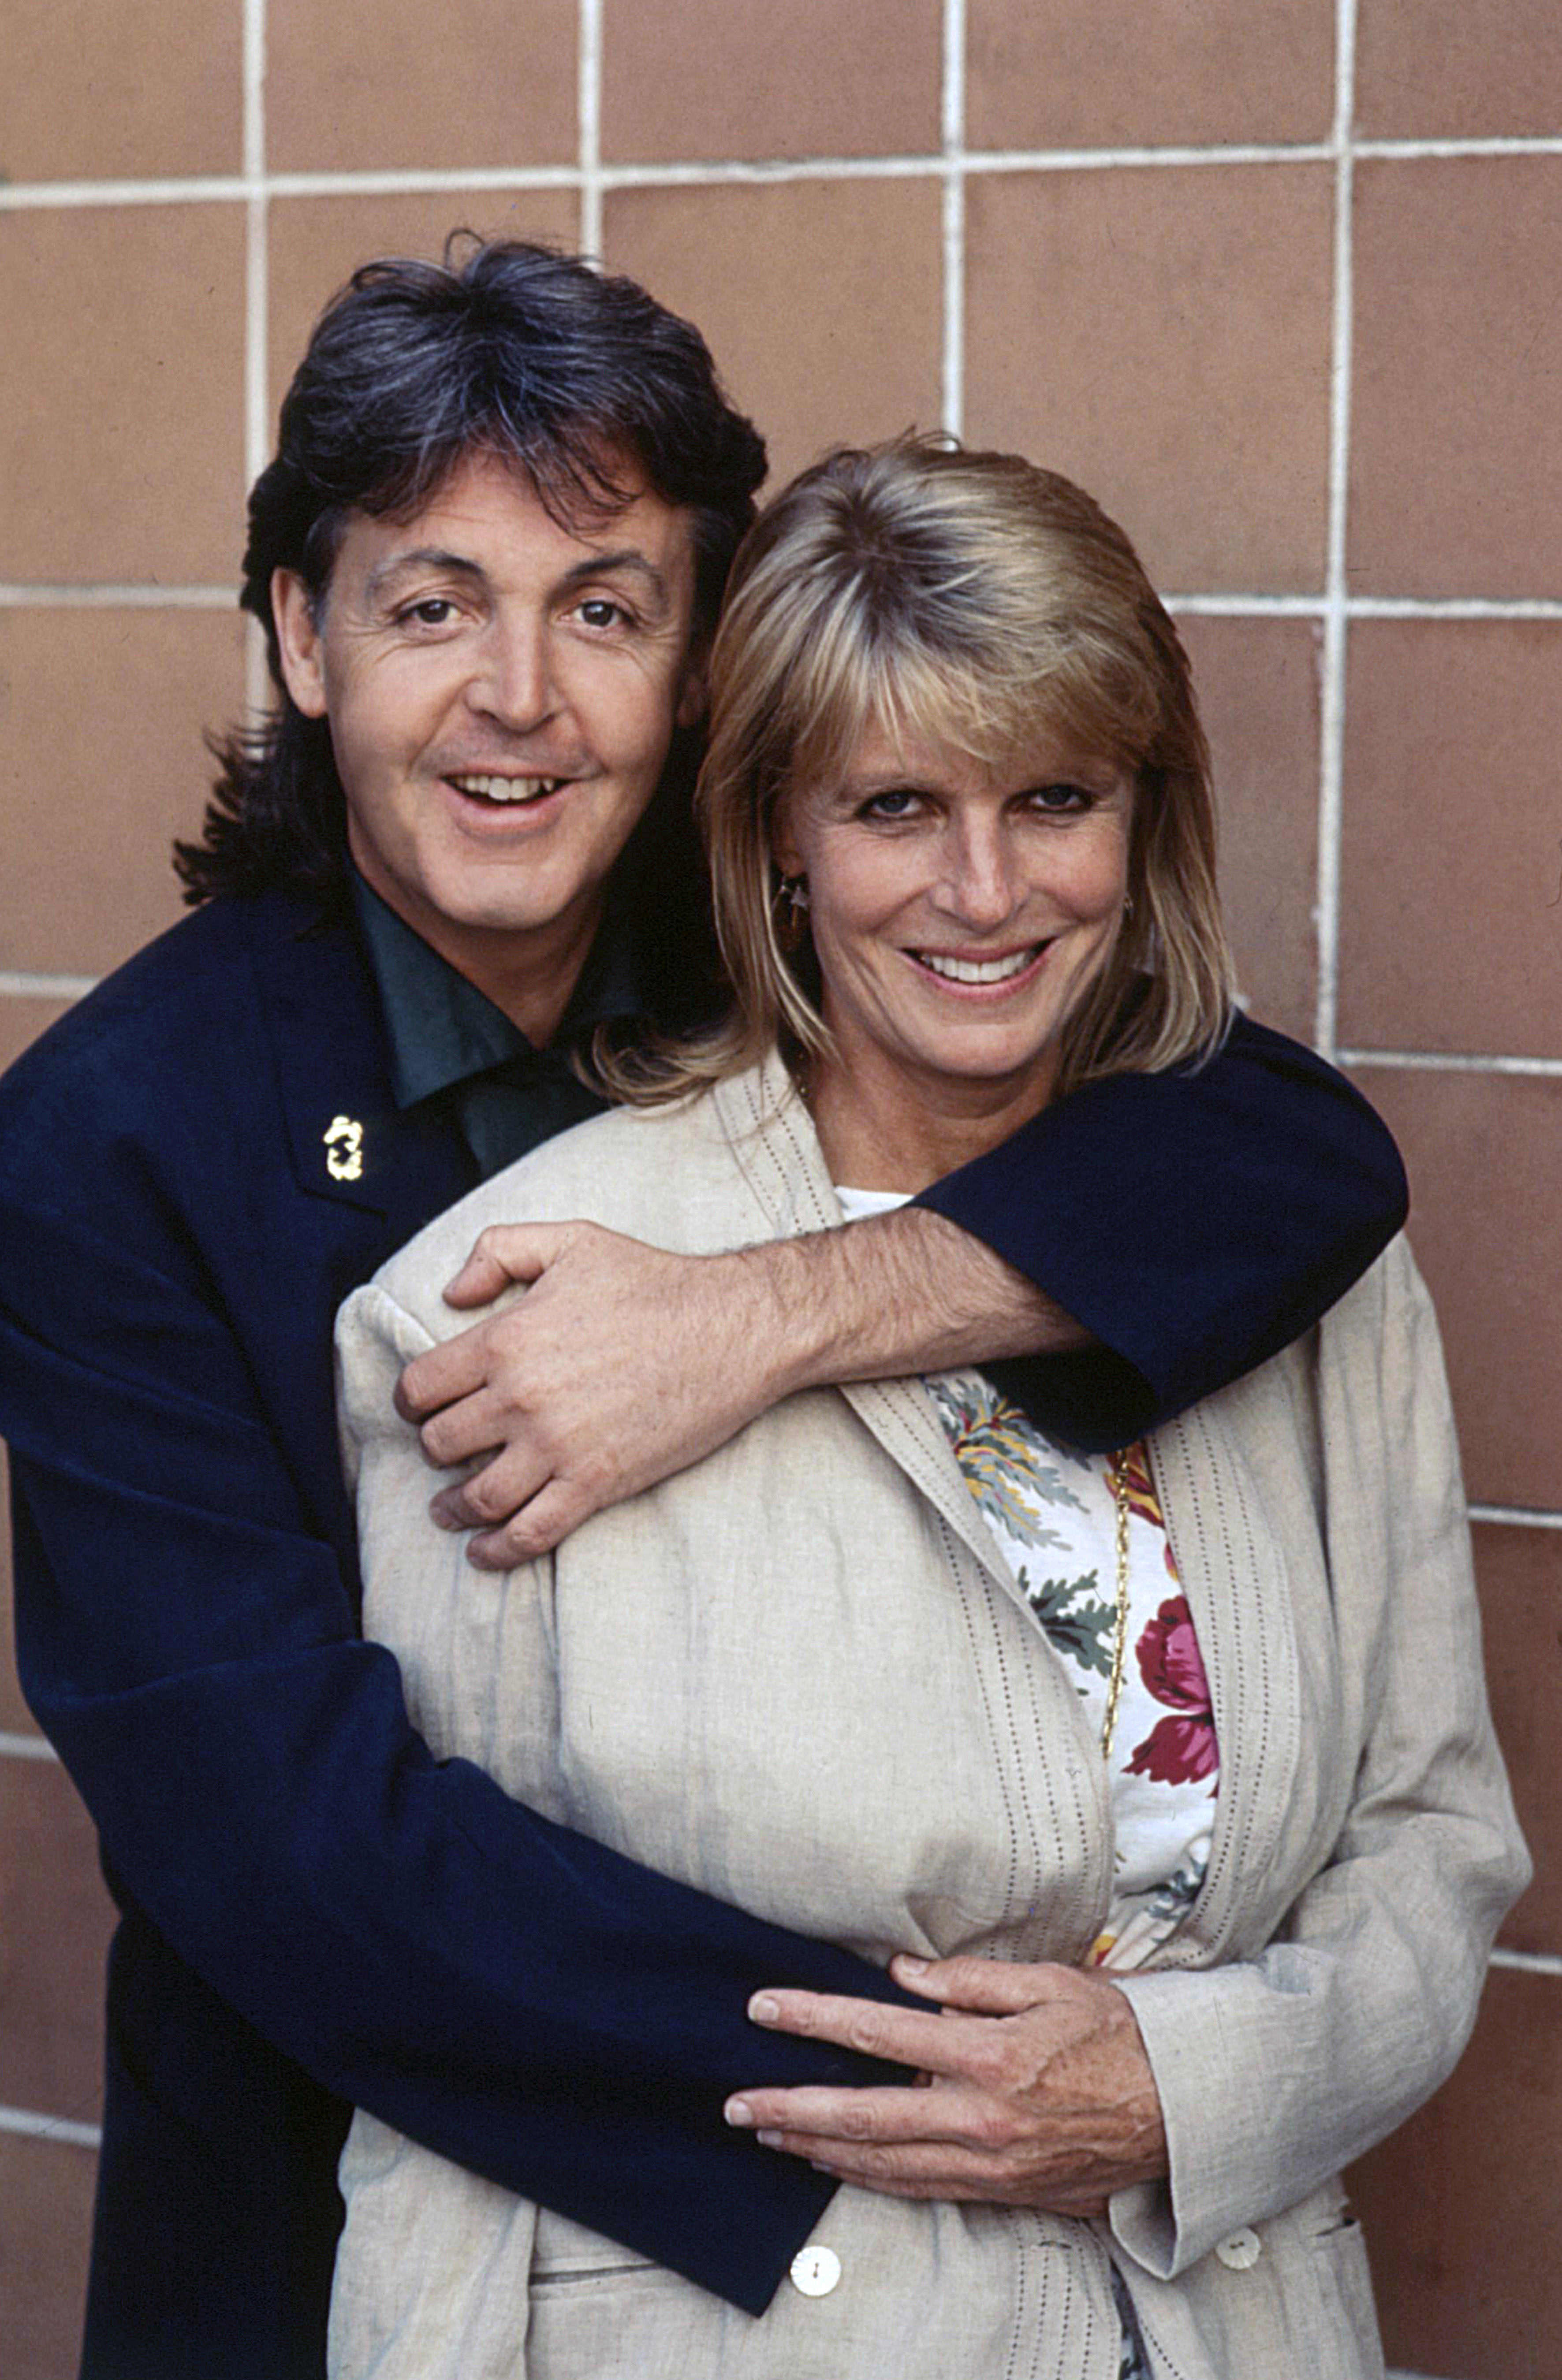 Paul McCartney with his wife Linda Eastman, circa 1989 | Source: Getty Images